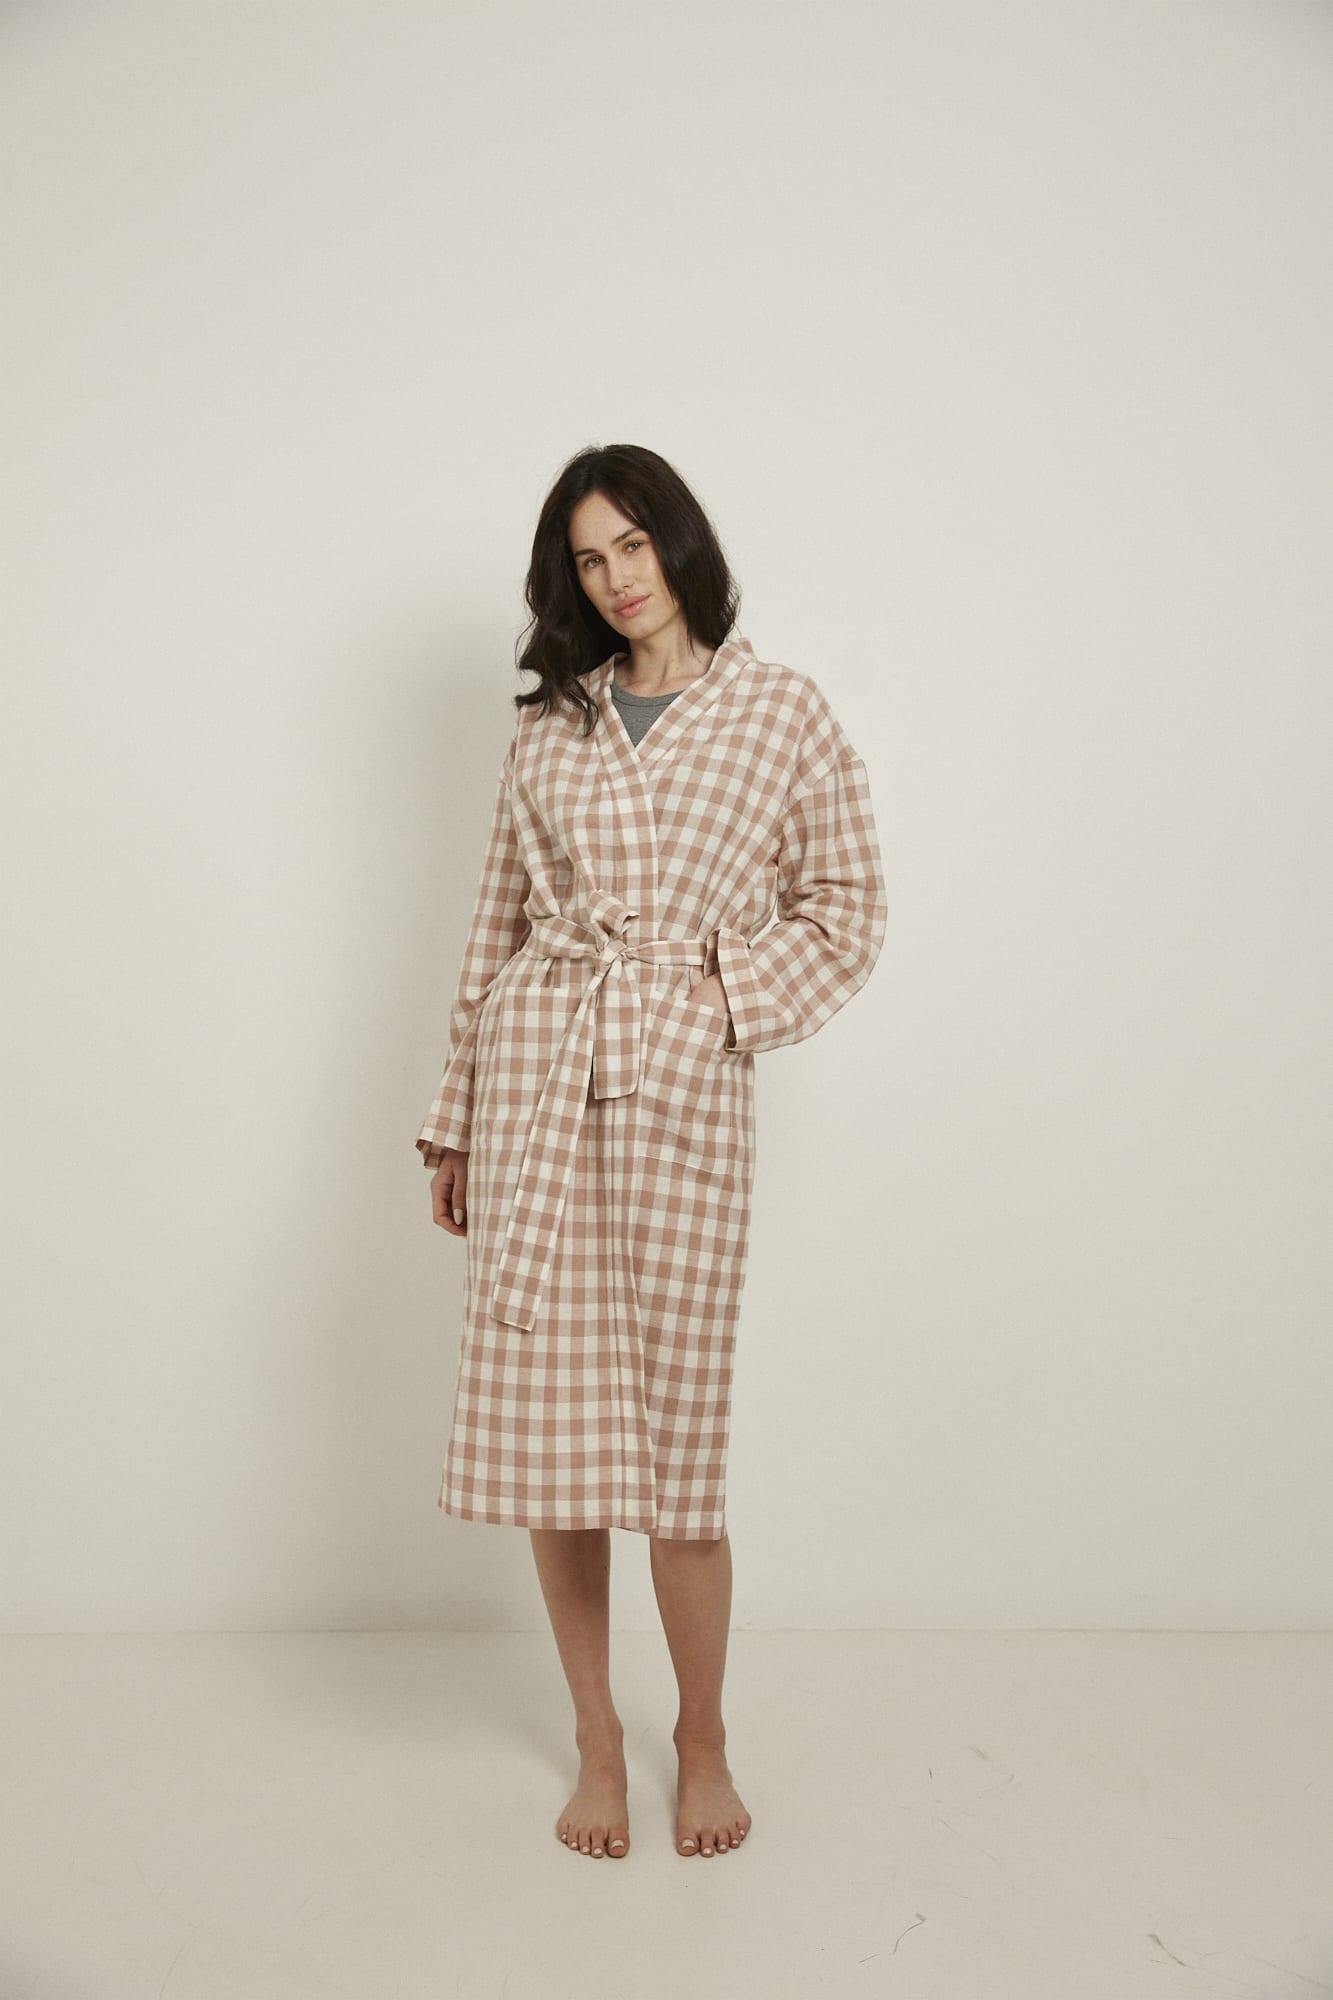 Women’s Robe.  Made from an organic cotton and linen blend, in a pink and white check.  This robe has a relaxed-fit with a dropped shoulder, front patch pockets and a tie belt. Finished with French seams.